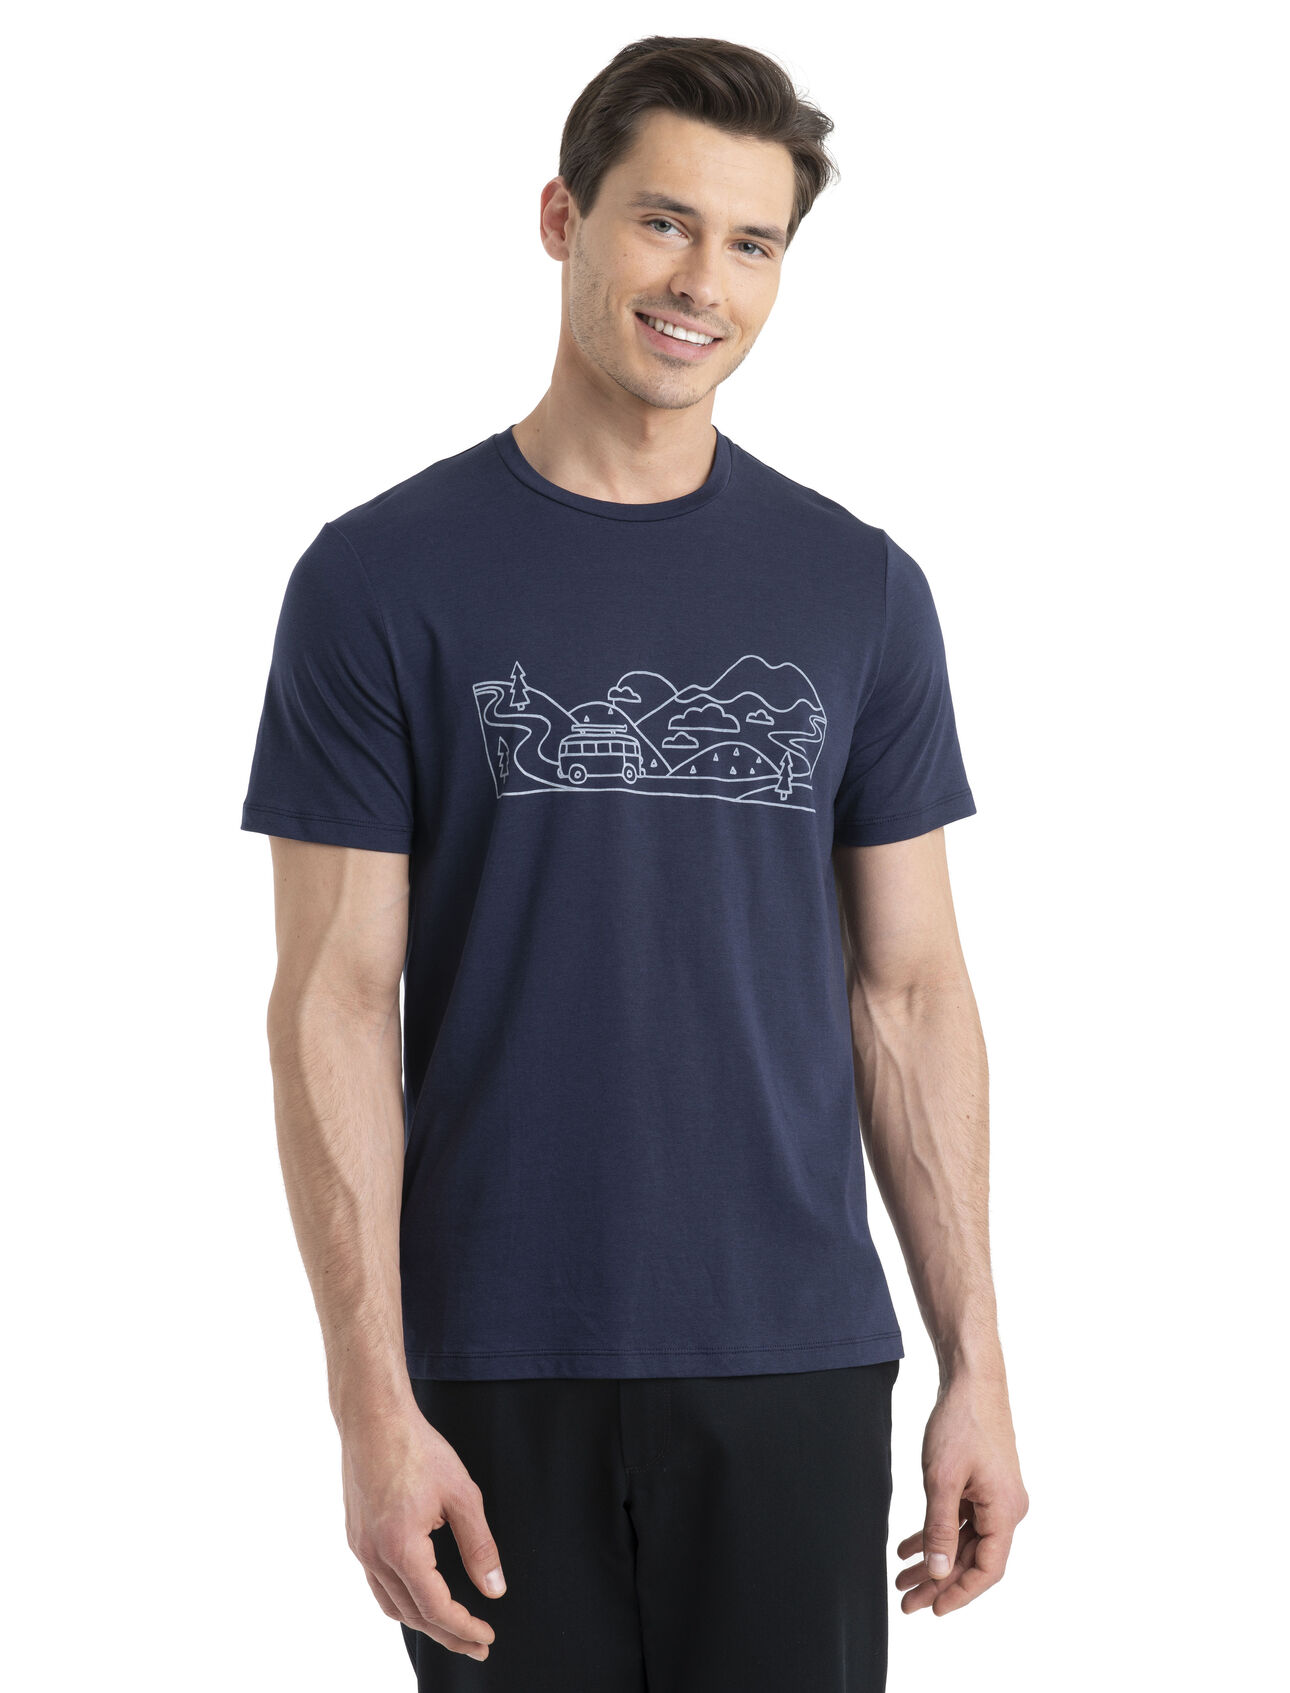 Mens Tencel™ Cotton Short Sleeve T-Shirt Combi Ski Trip A clean and comfortable everyday tee with classic style and a blend of natural fibres, the Tencel Cotton Short Sleeve Tee Combi Ski Trip features a super-soft jersey fabric that combines organic cotton and TENCEL™. The original artwork draws inspiration from a classic roadtrip in search of powder. 